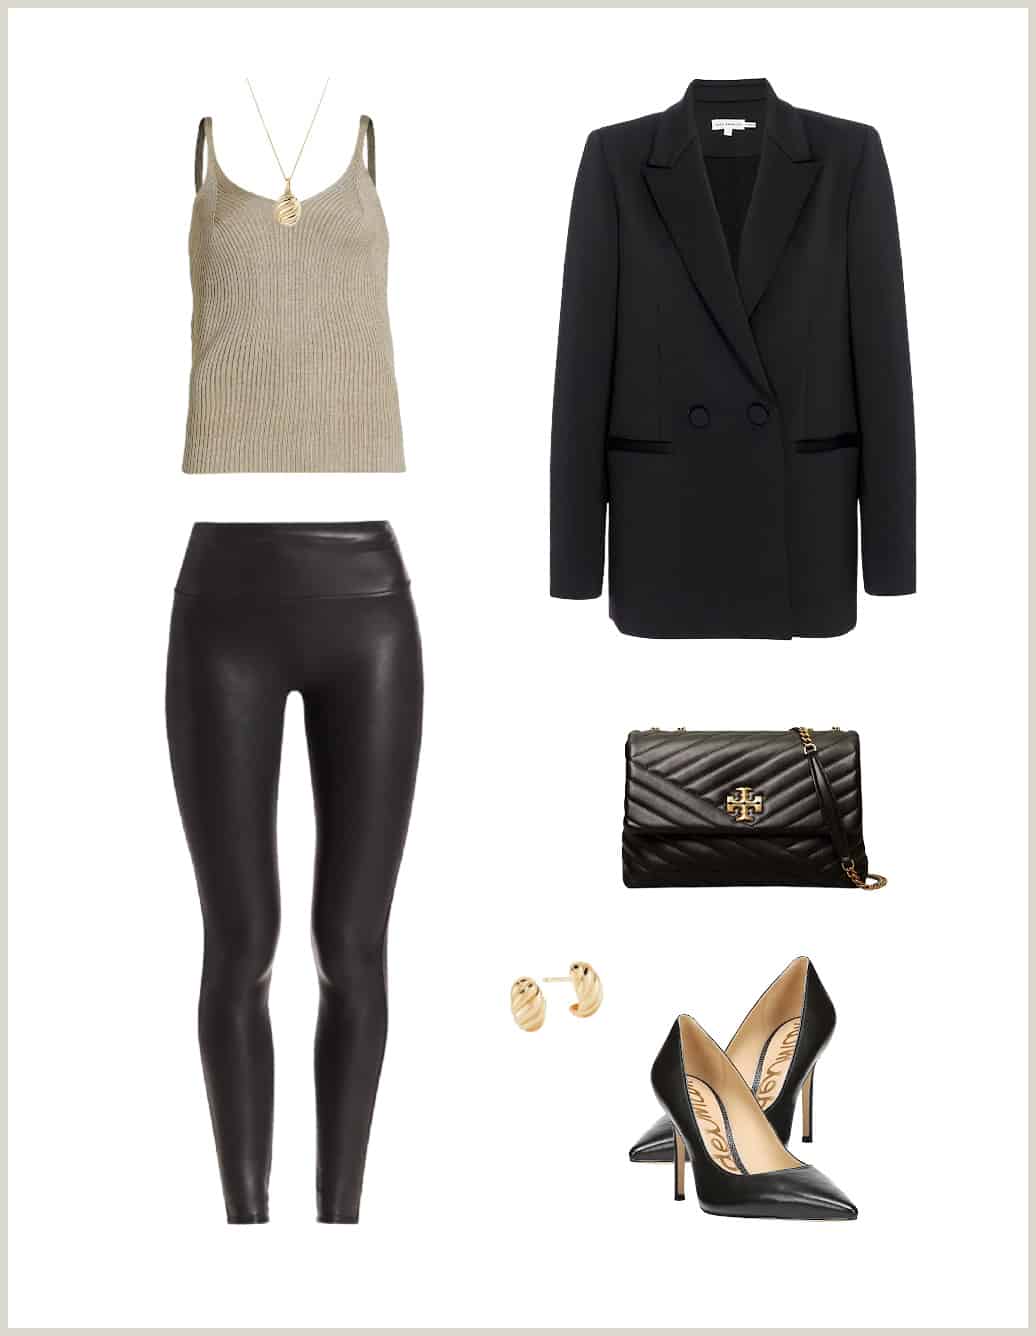 image of an outfit mood board with a knit camisole, black blazer, black faux leather leggings, black pumps, a black purse, and gold jewelry